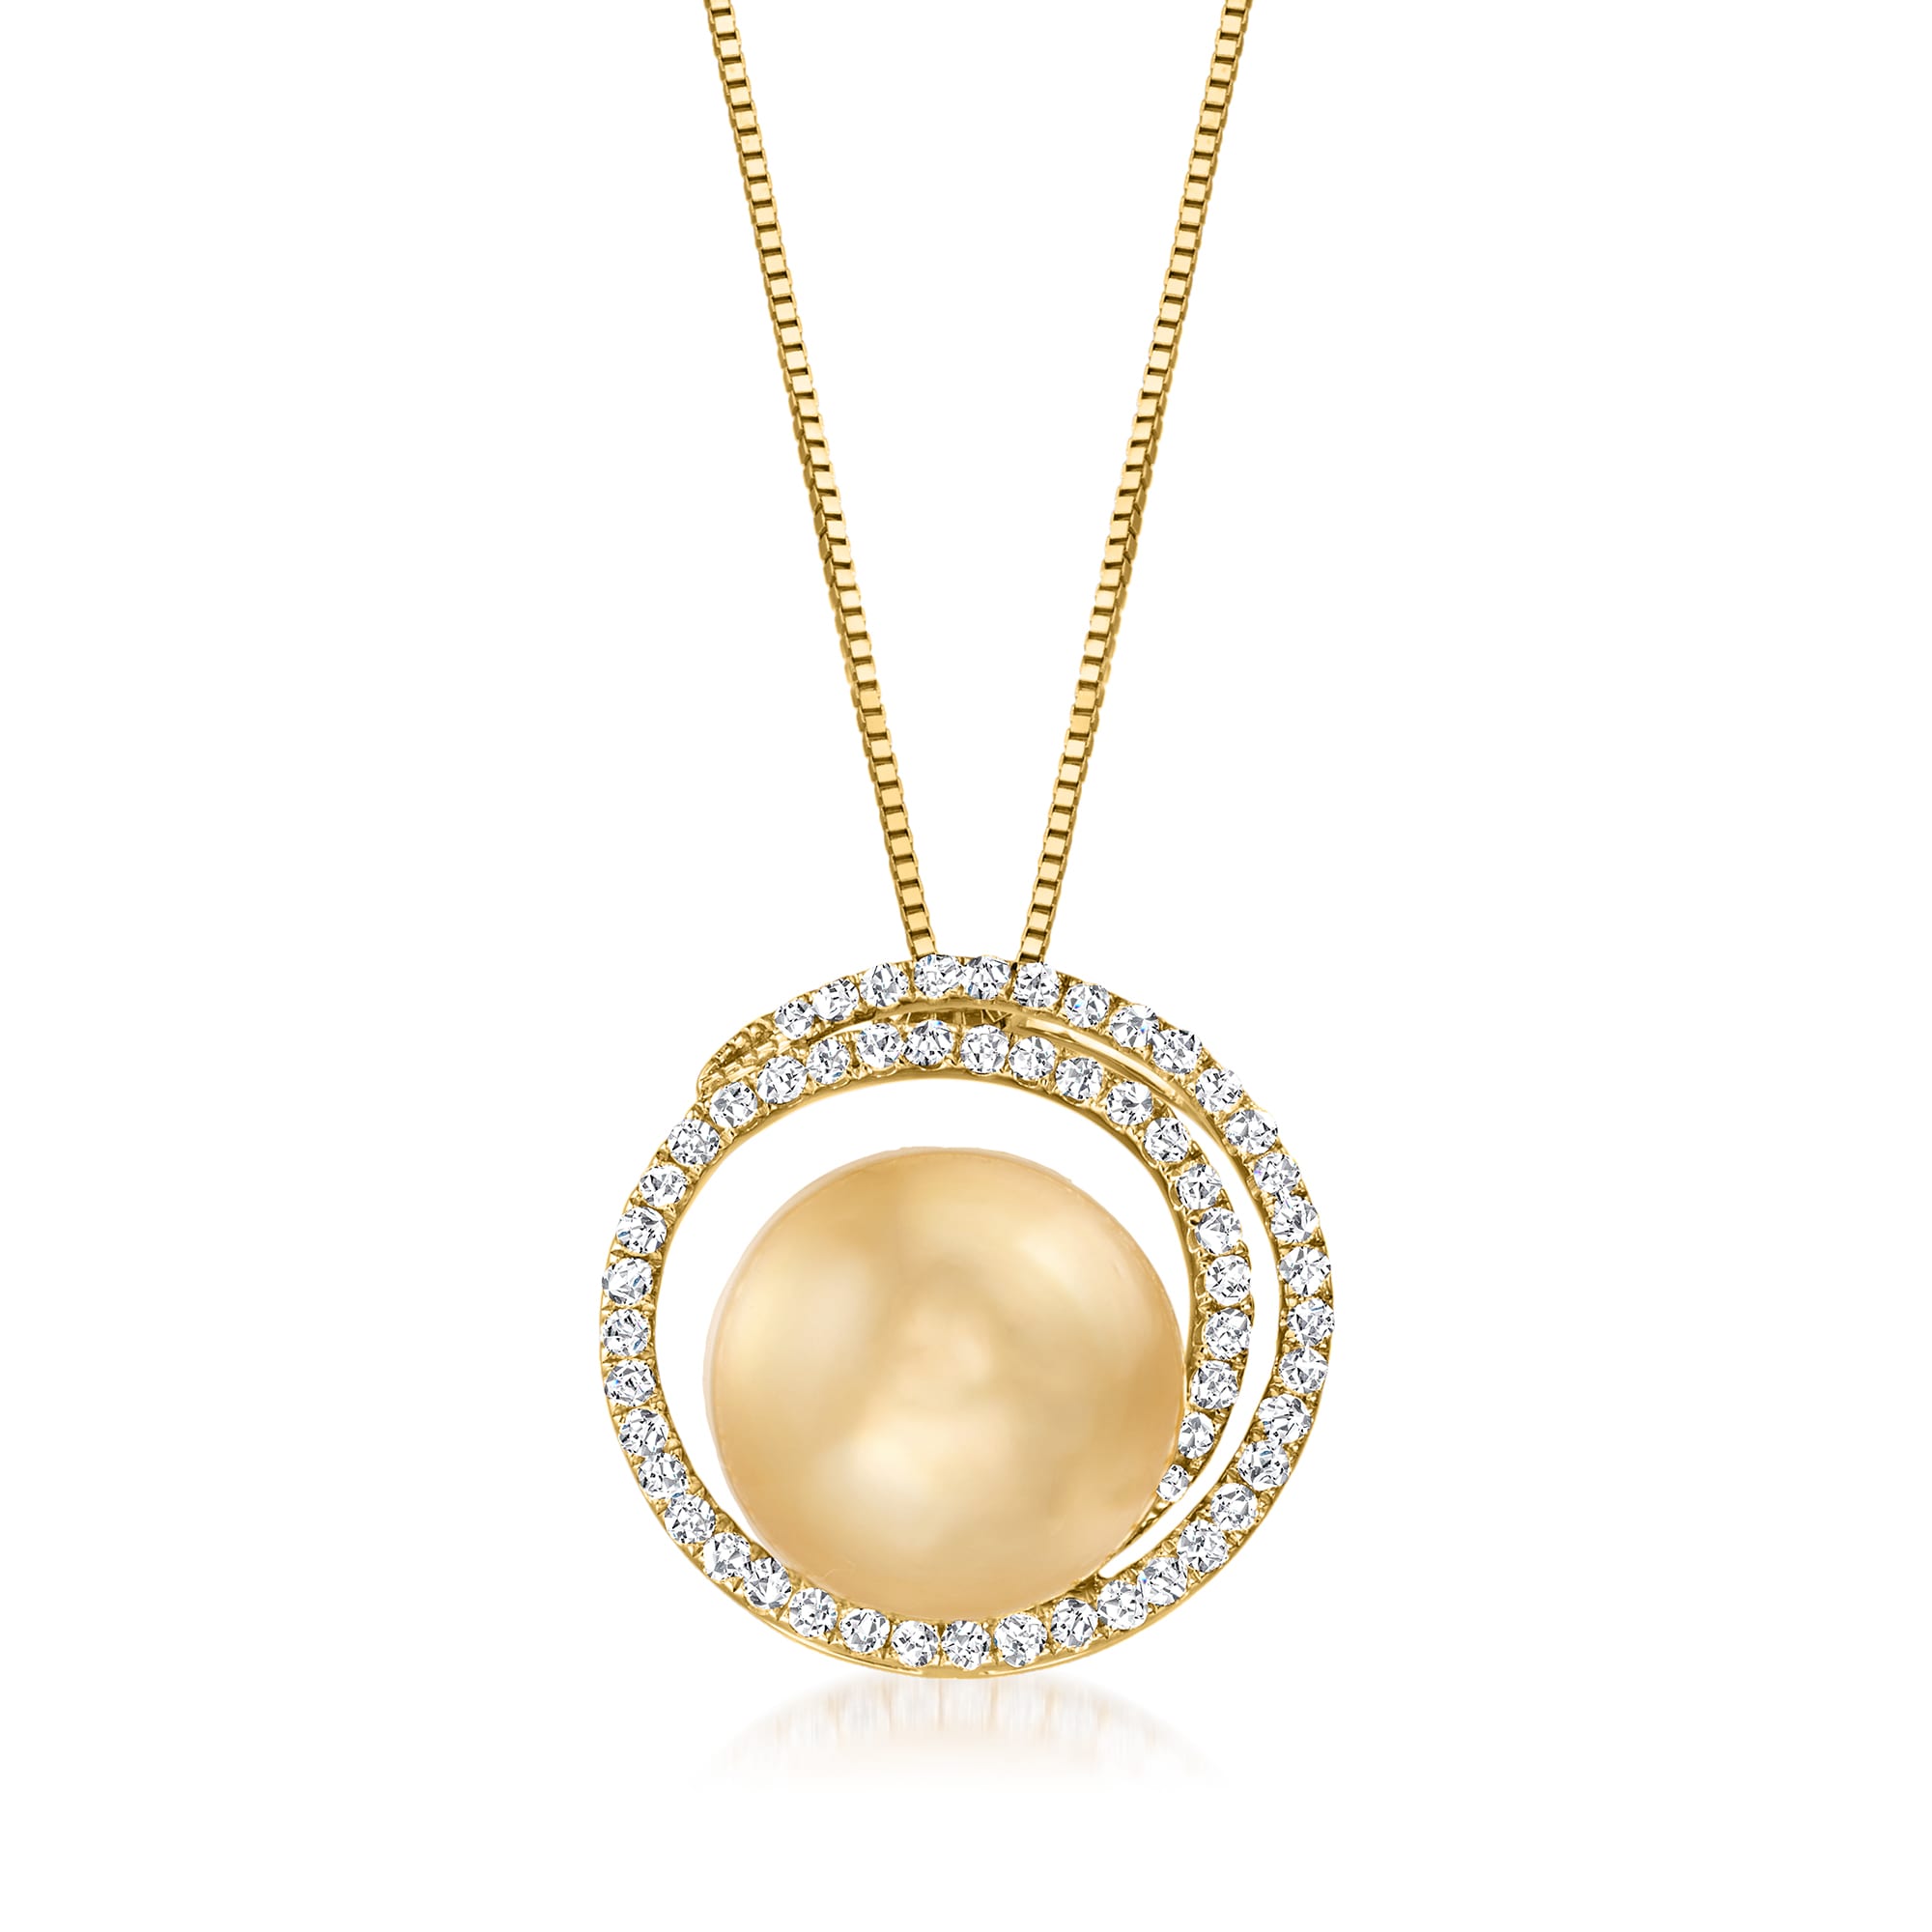 12-13mm Cultured Golden South Sea Pearl and .48 ct. t.w. Diamond Swirl Pendant  Necklace in 18kt Yellow Gold